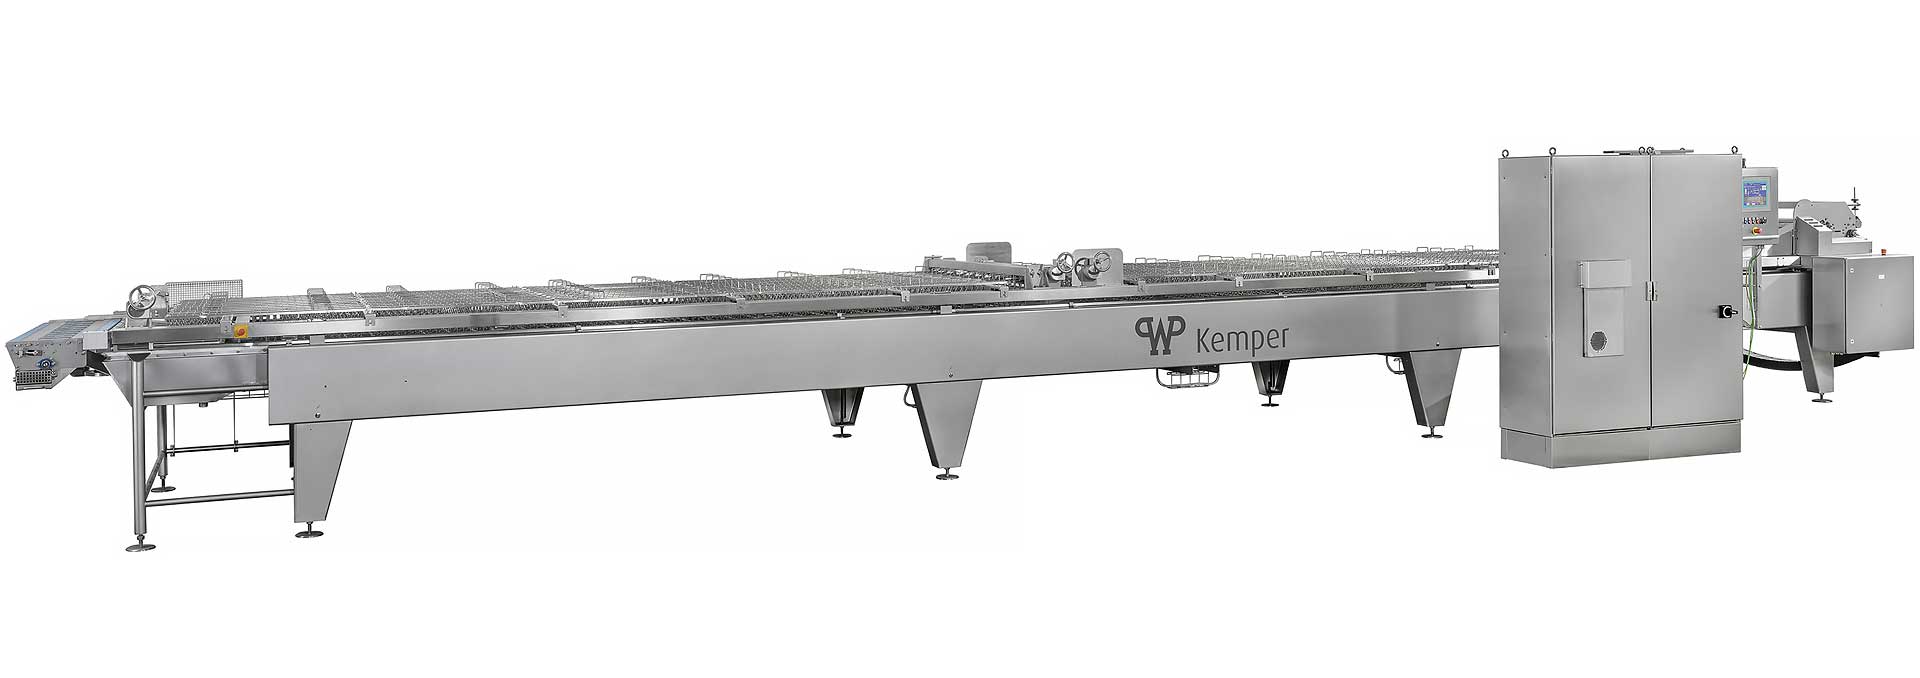 WP Kemper LARGO S Deep Fryer, WP Bakery Group USA, Retail, Wholesale and Industrial Bakery Equipment and Food Service Industry Equipment, Shelton, CT